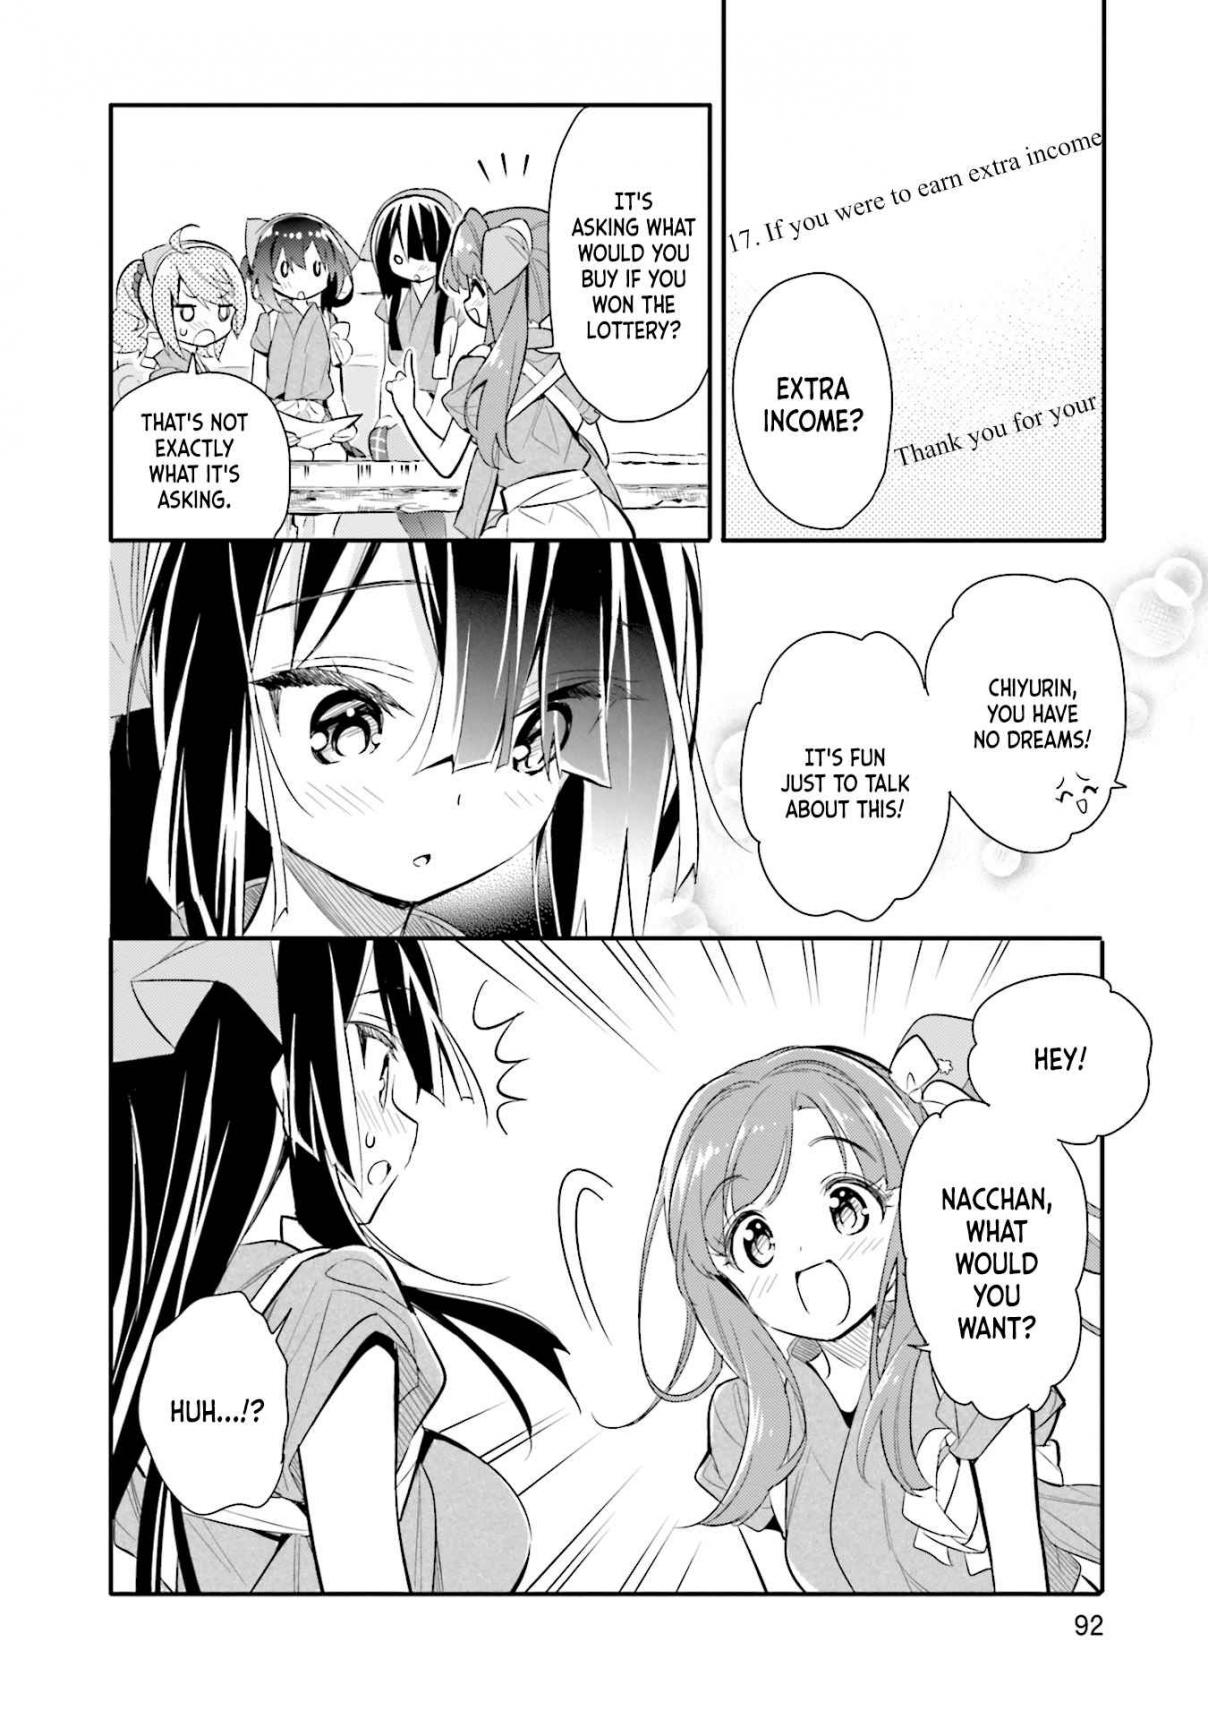 Chotto Ippai! Vol. 2 Ch. 11 I want to ask you something